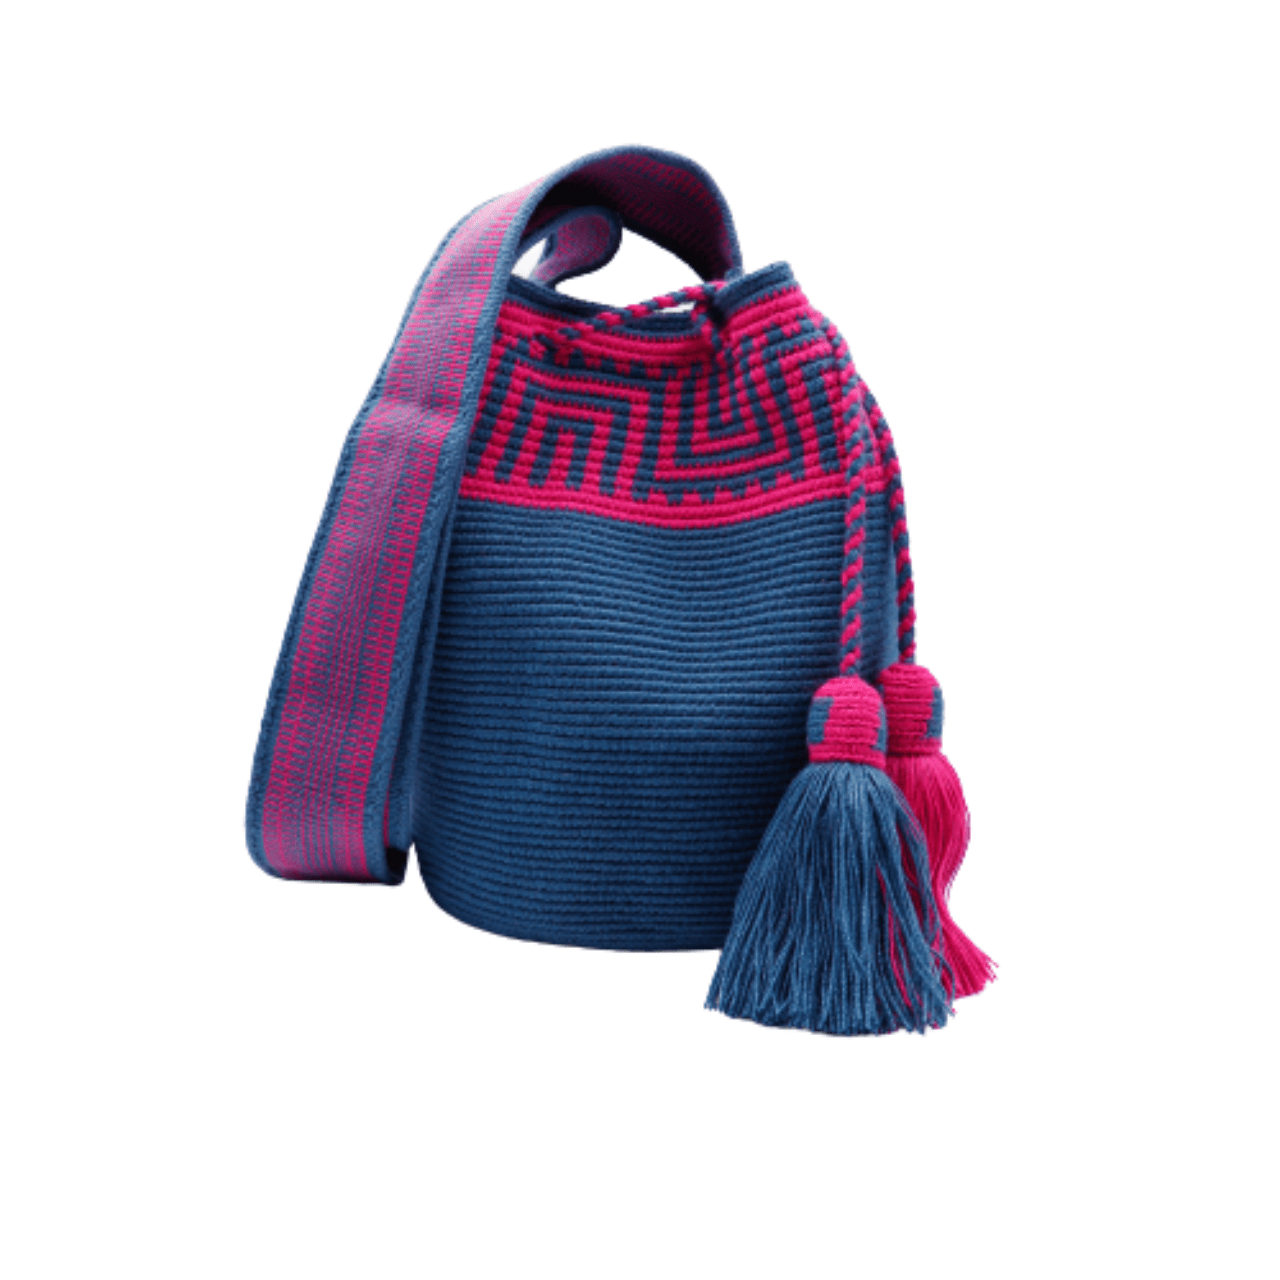 Pao Wayuu bag in solid cobalt blue with captivating magenta design on top, creating a beautiful and uniquely crafted accessory.